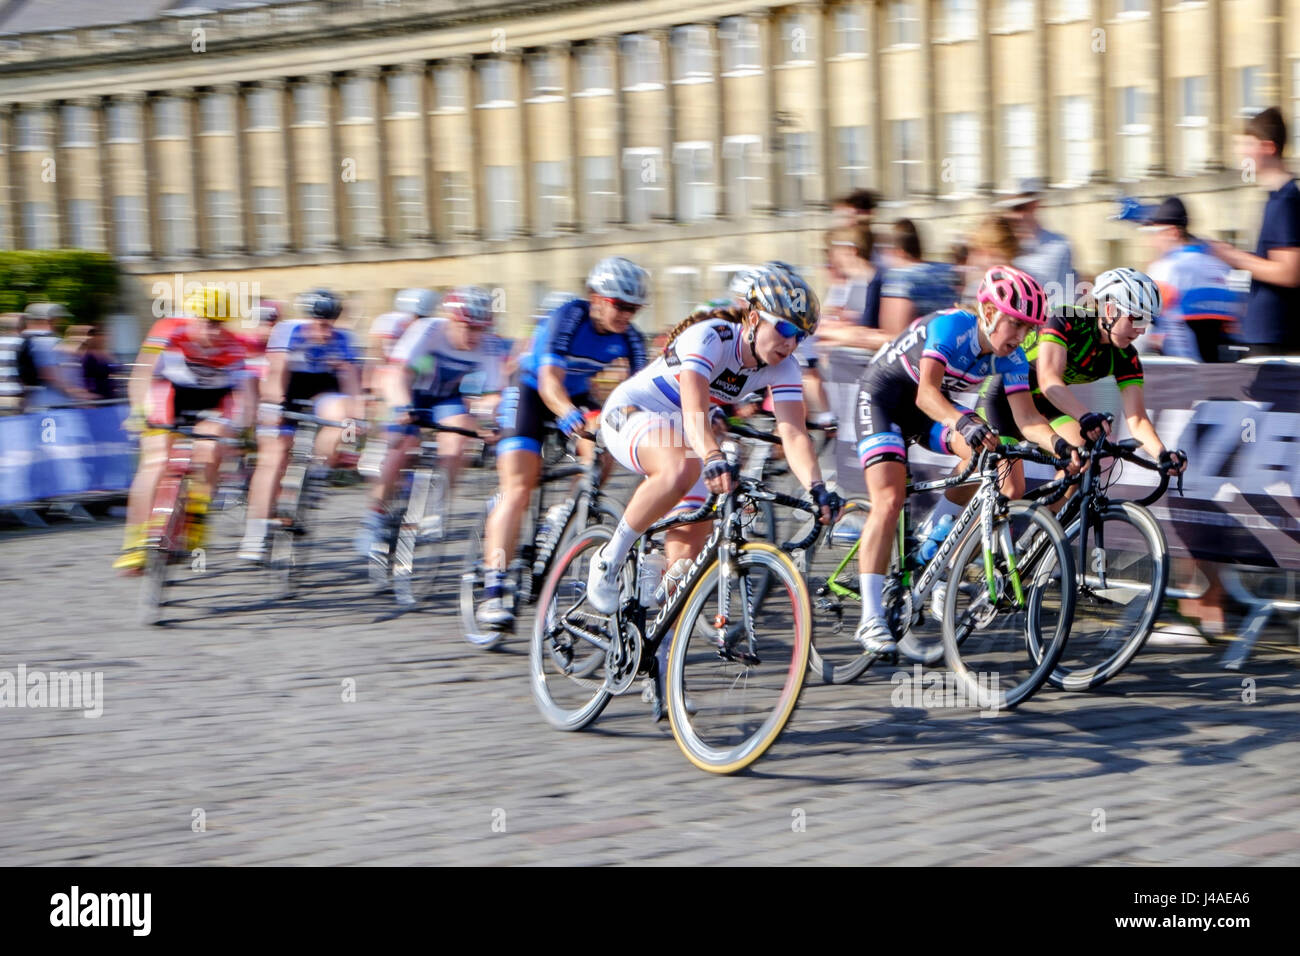 Competitors are pictured in Bath's Royal Crescent as they take part in the final round of the womens Matrix Fitness Grand Prix Series bicycle race Stock Photo